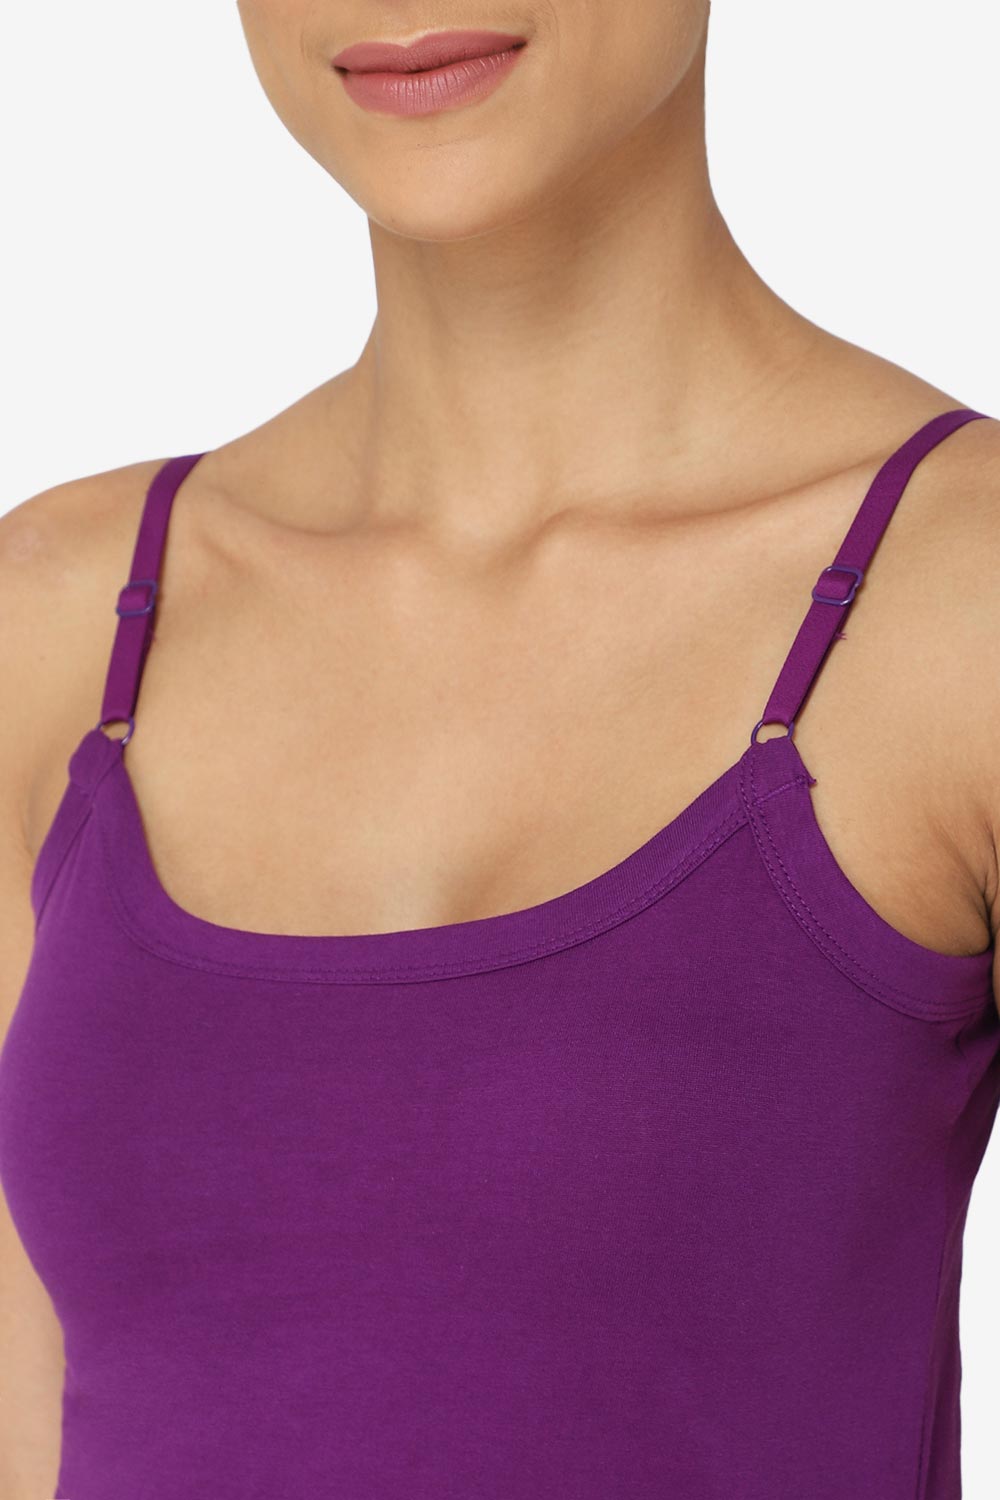 Intimacy Camisole-Slip Special Combo Pack - In05 - Pack of 3 - C34